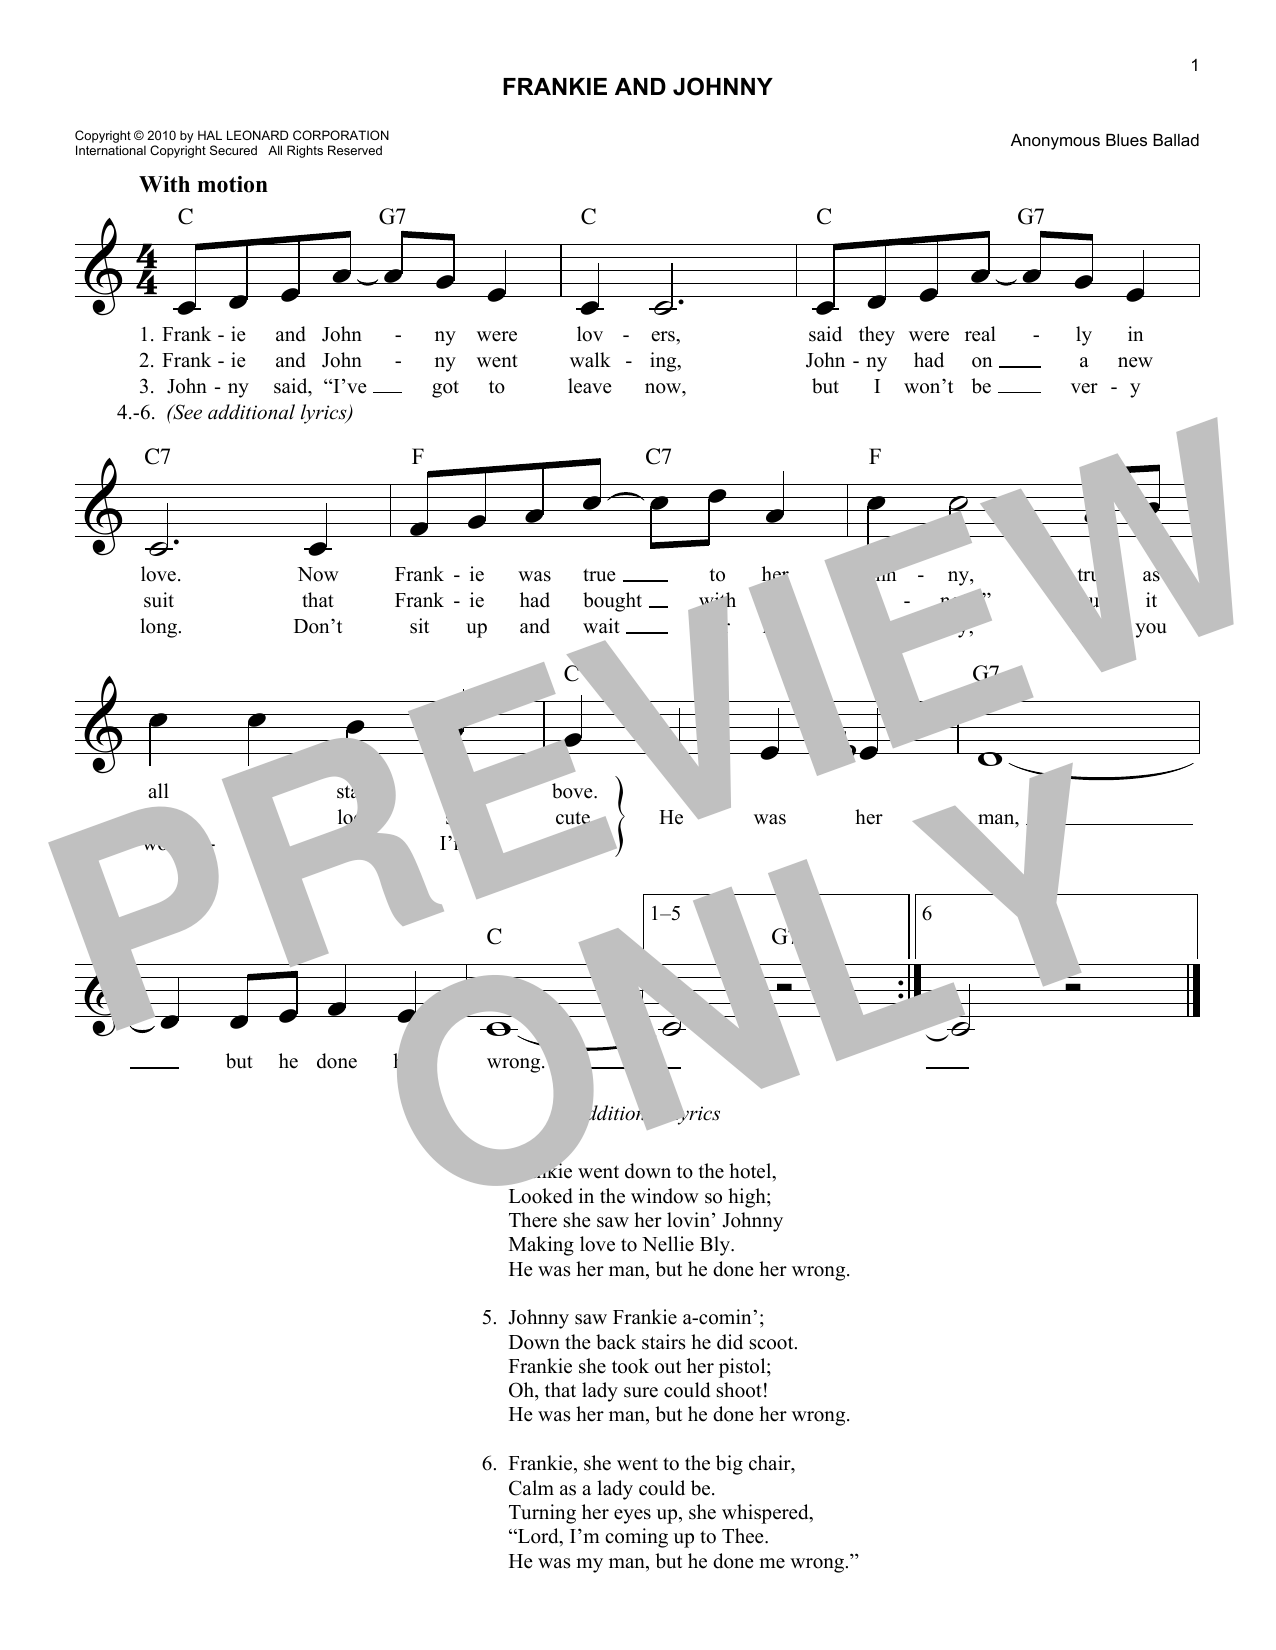 Download Anonymous Blues Ballad Frankie And Johnny Sheet Music